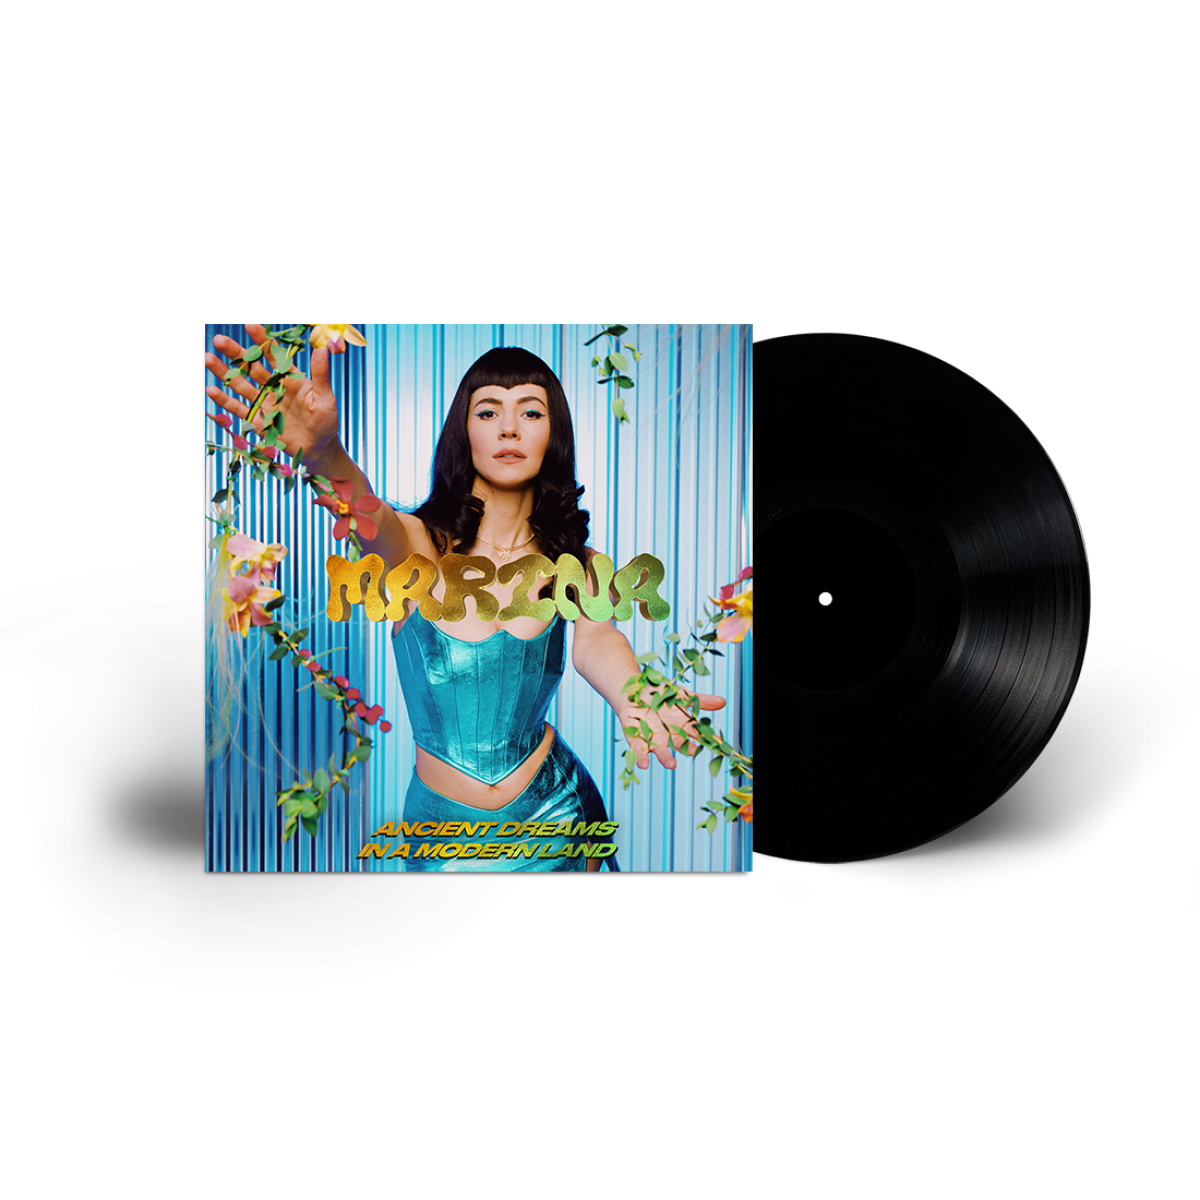 Ancient dreams in modern land speed up. Ancient Dreams in a Modern Land Marina Vinyl. Marina - 2021 - Ancient Dreams in a Modern Land. Marina Ancient Dreams in a Modern. Marina and the Diamonds Ancient Dreams in a Modern Land.